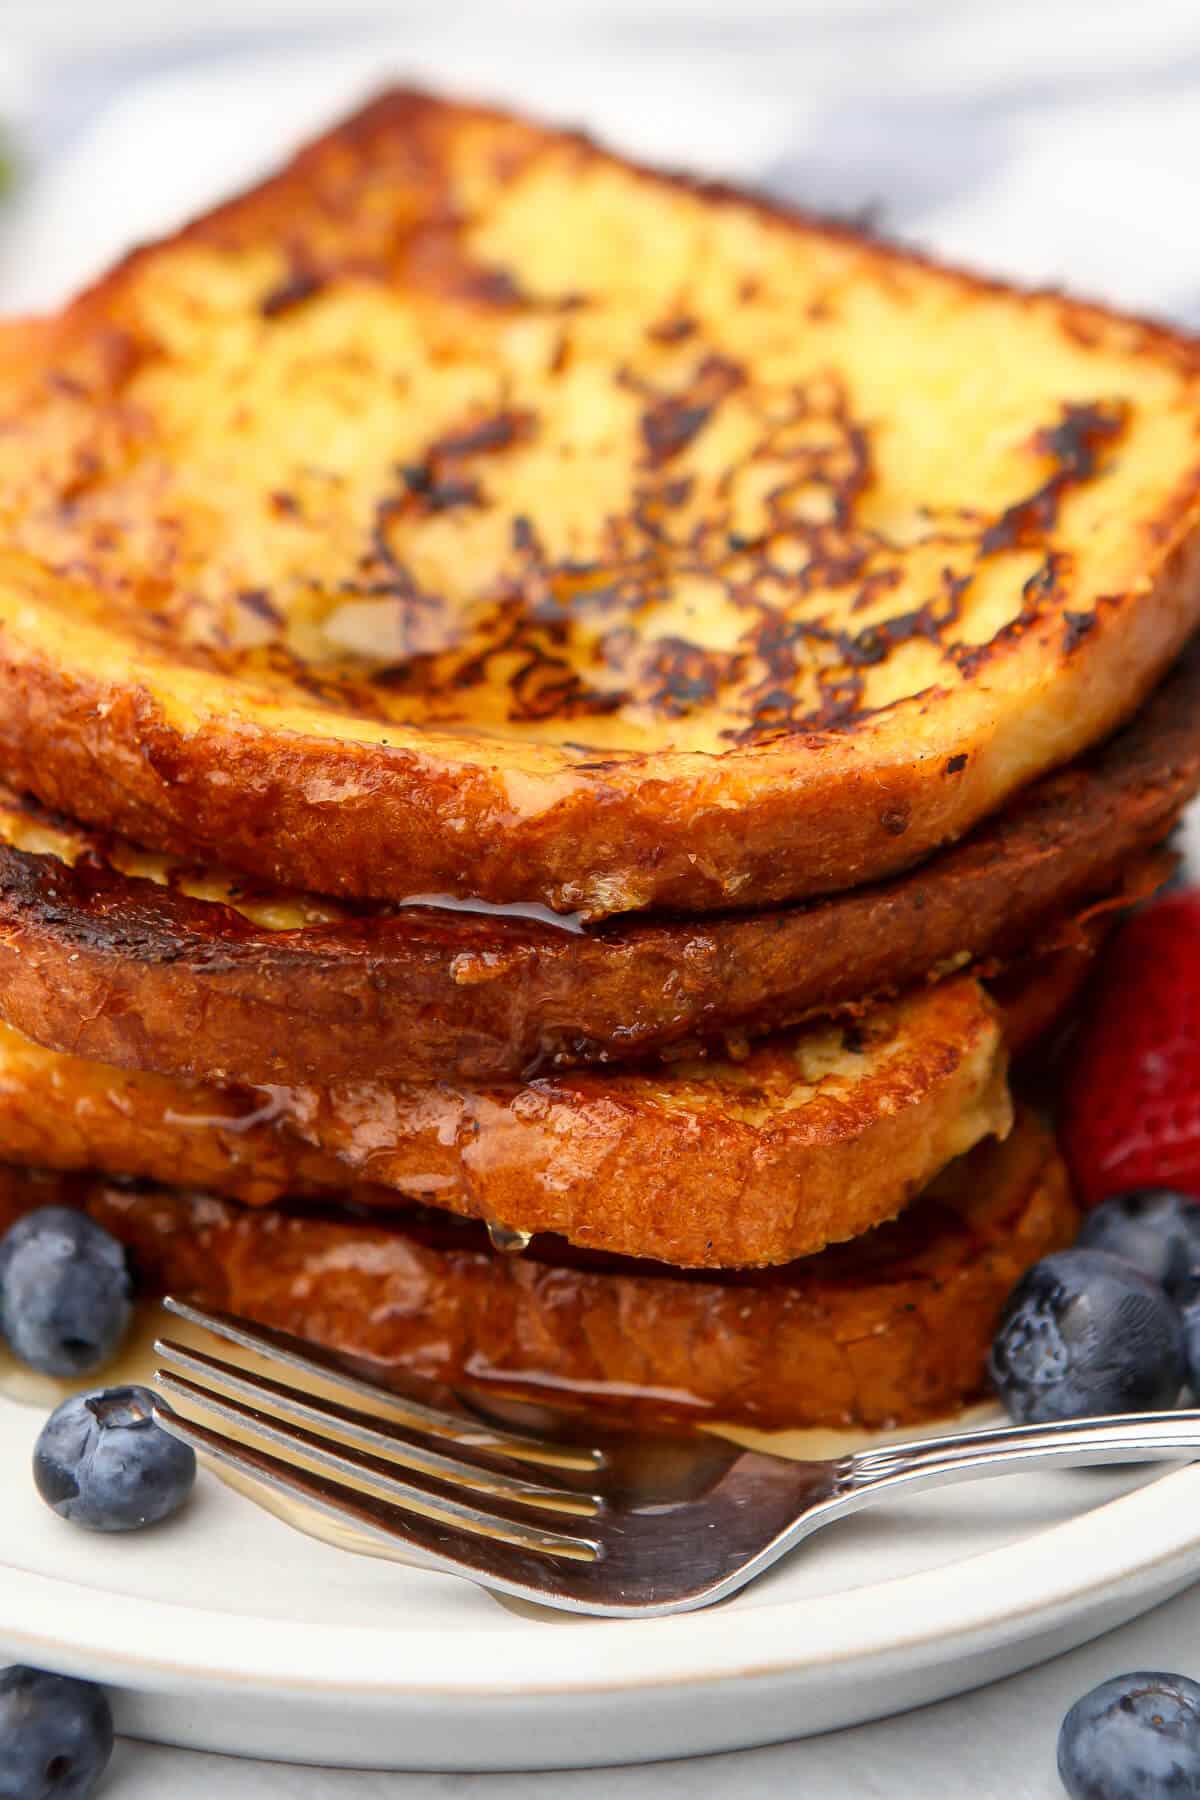 A close up of a stack of vegan French toast made from Just Egg.